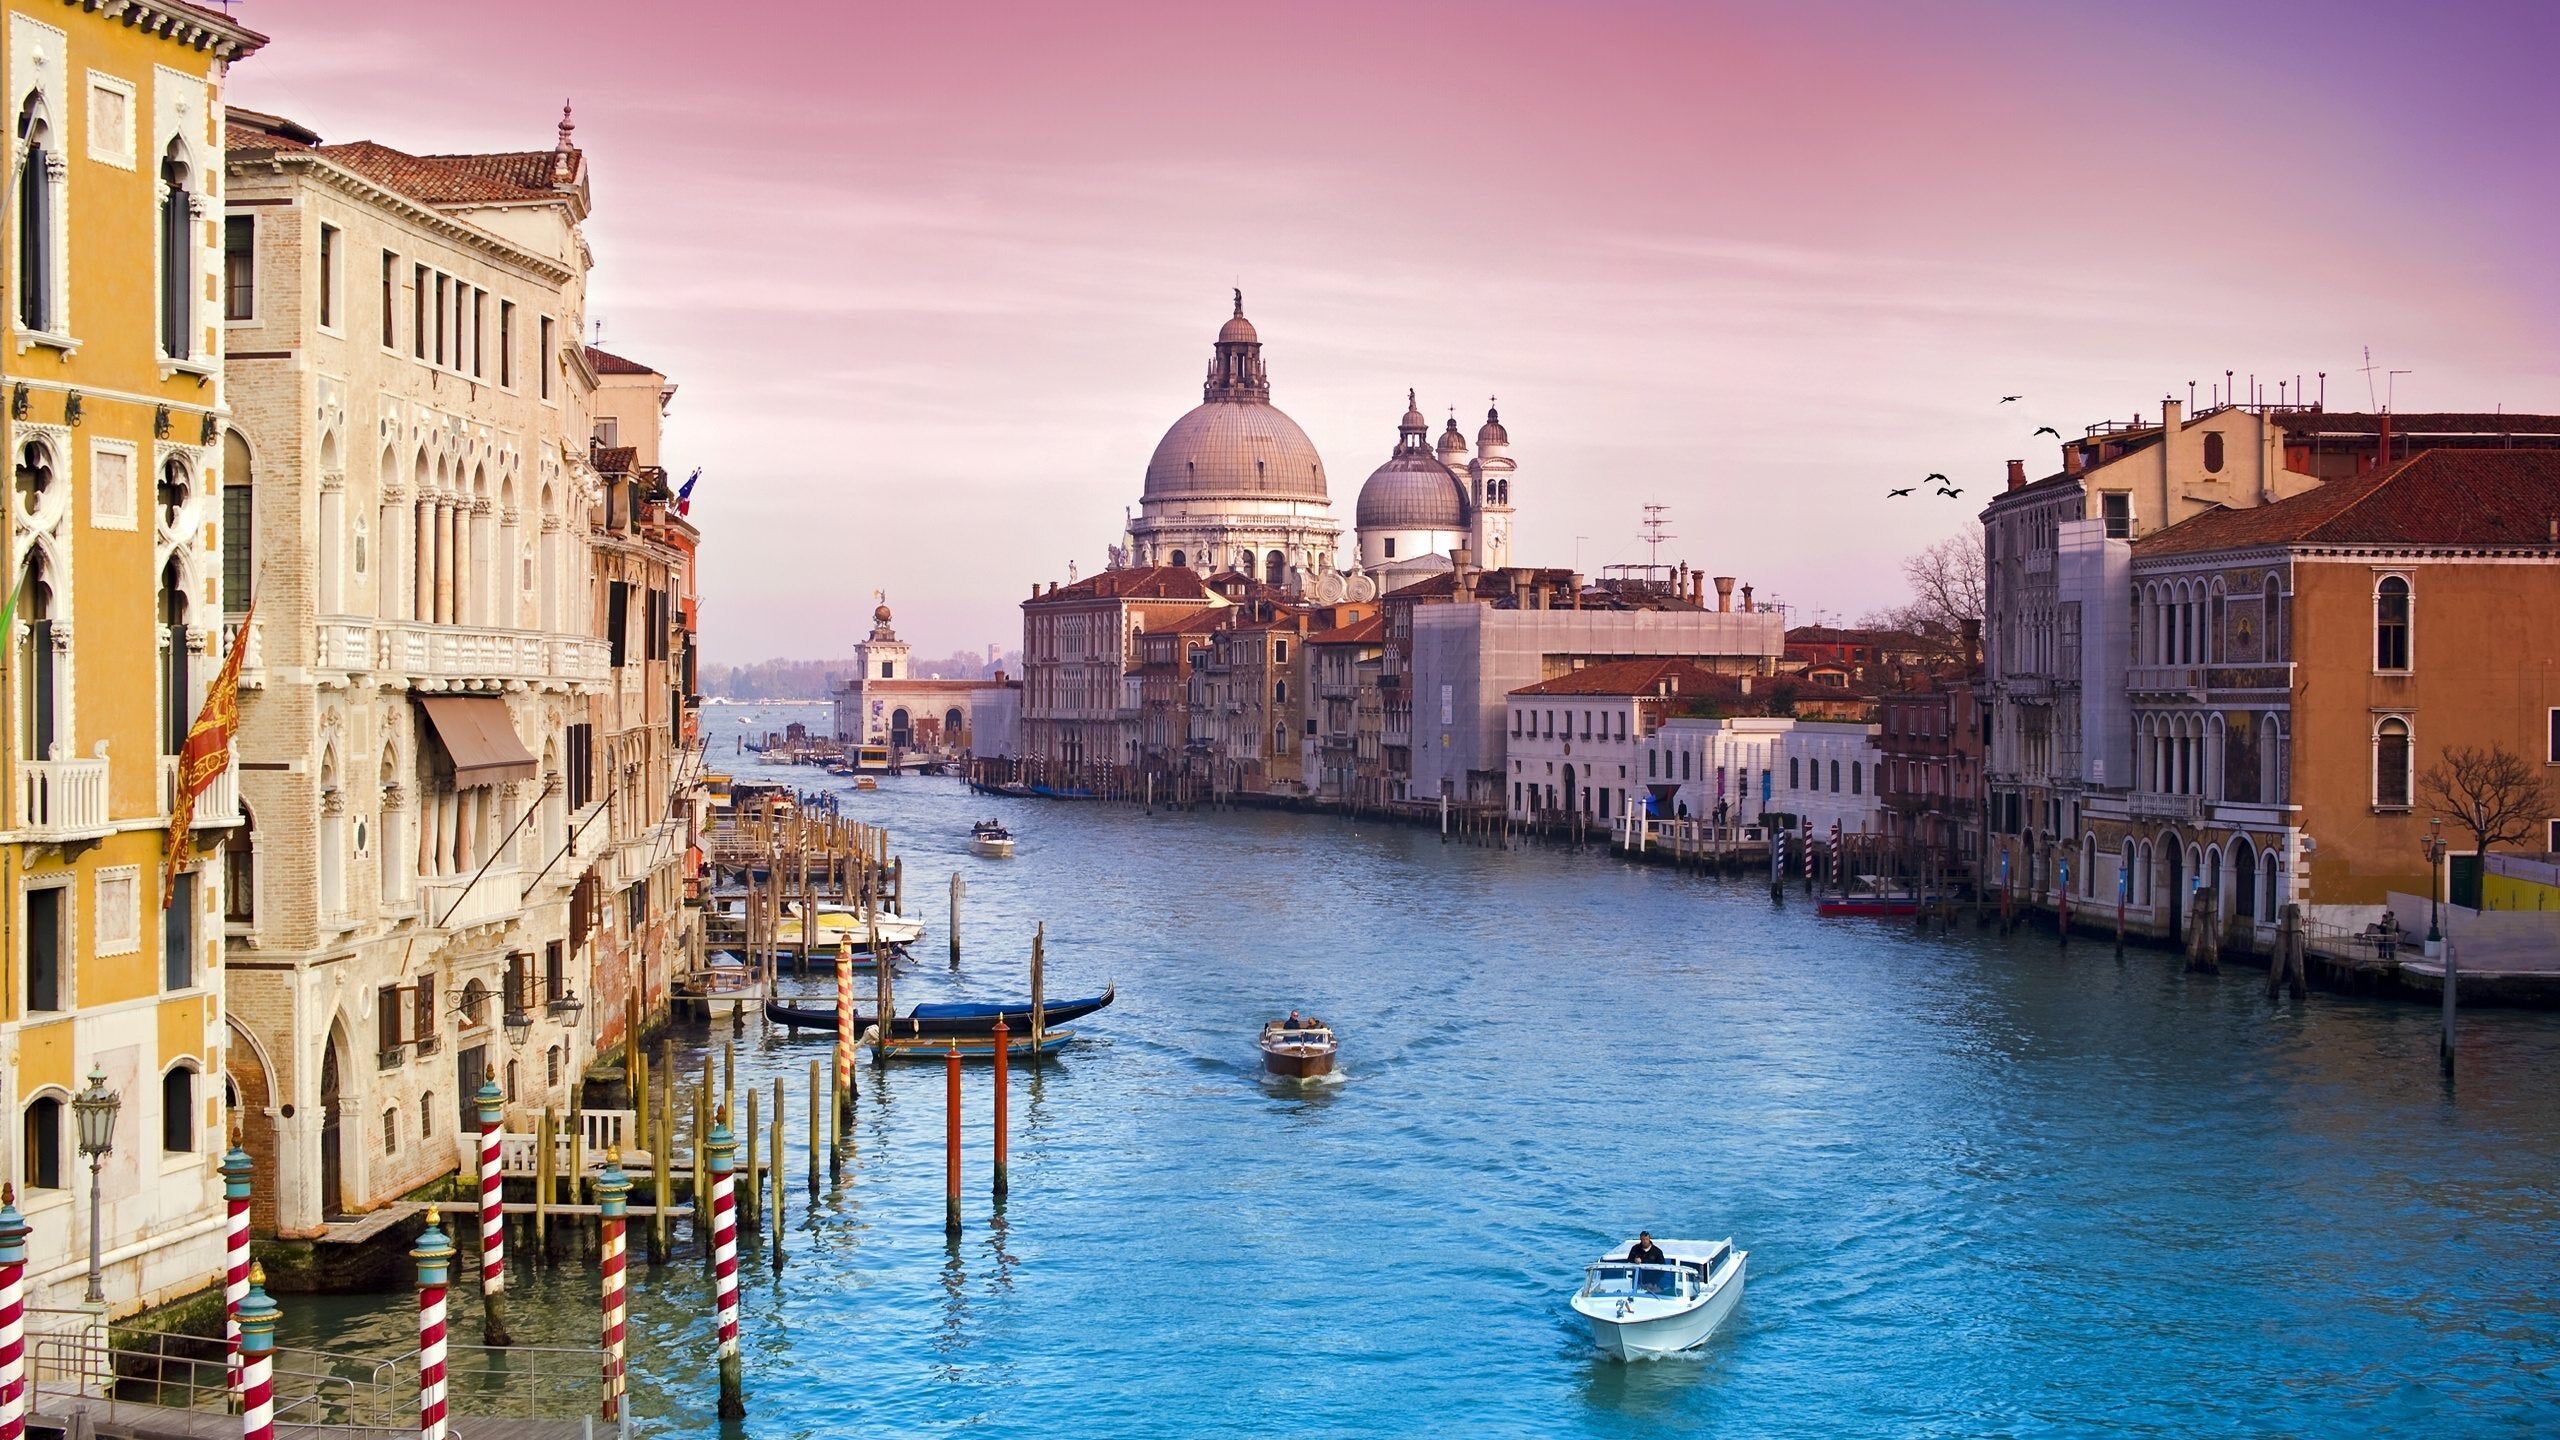 Venice 4K wallpaper for your desktop or mobile screen free and easy to download